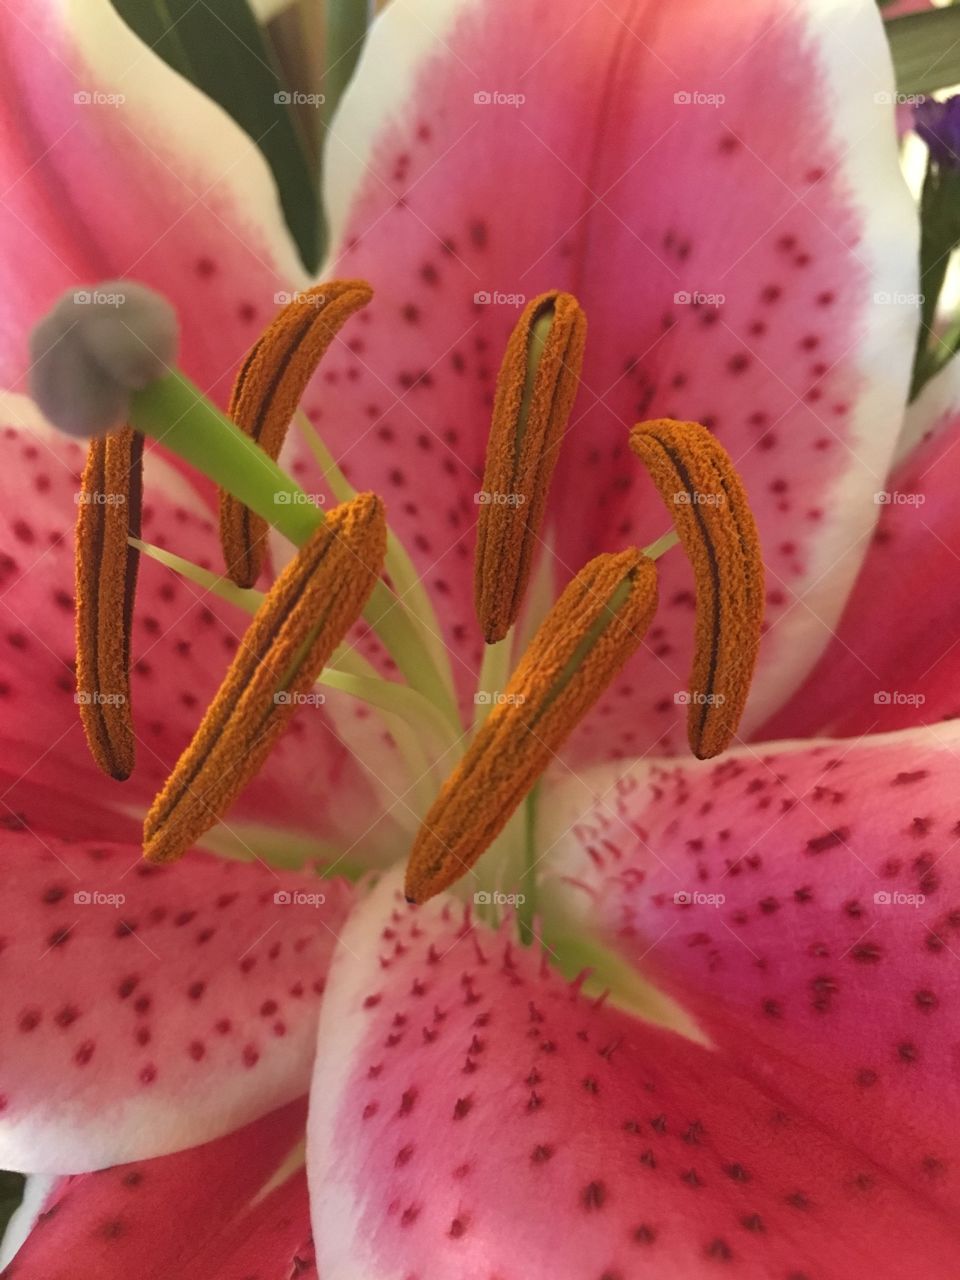 Lily texture